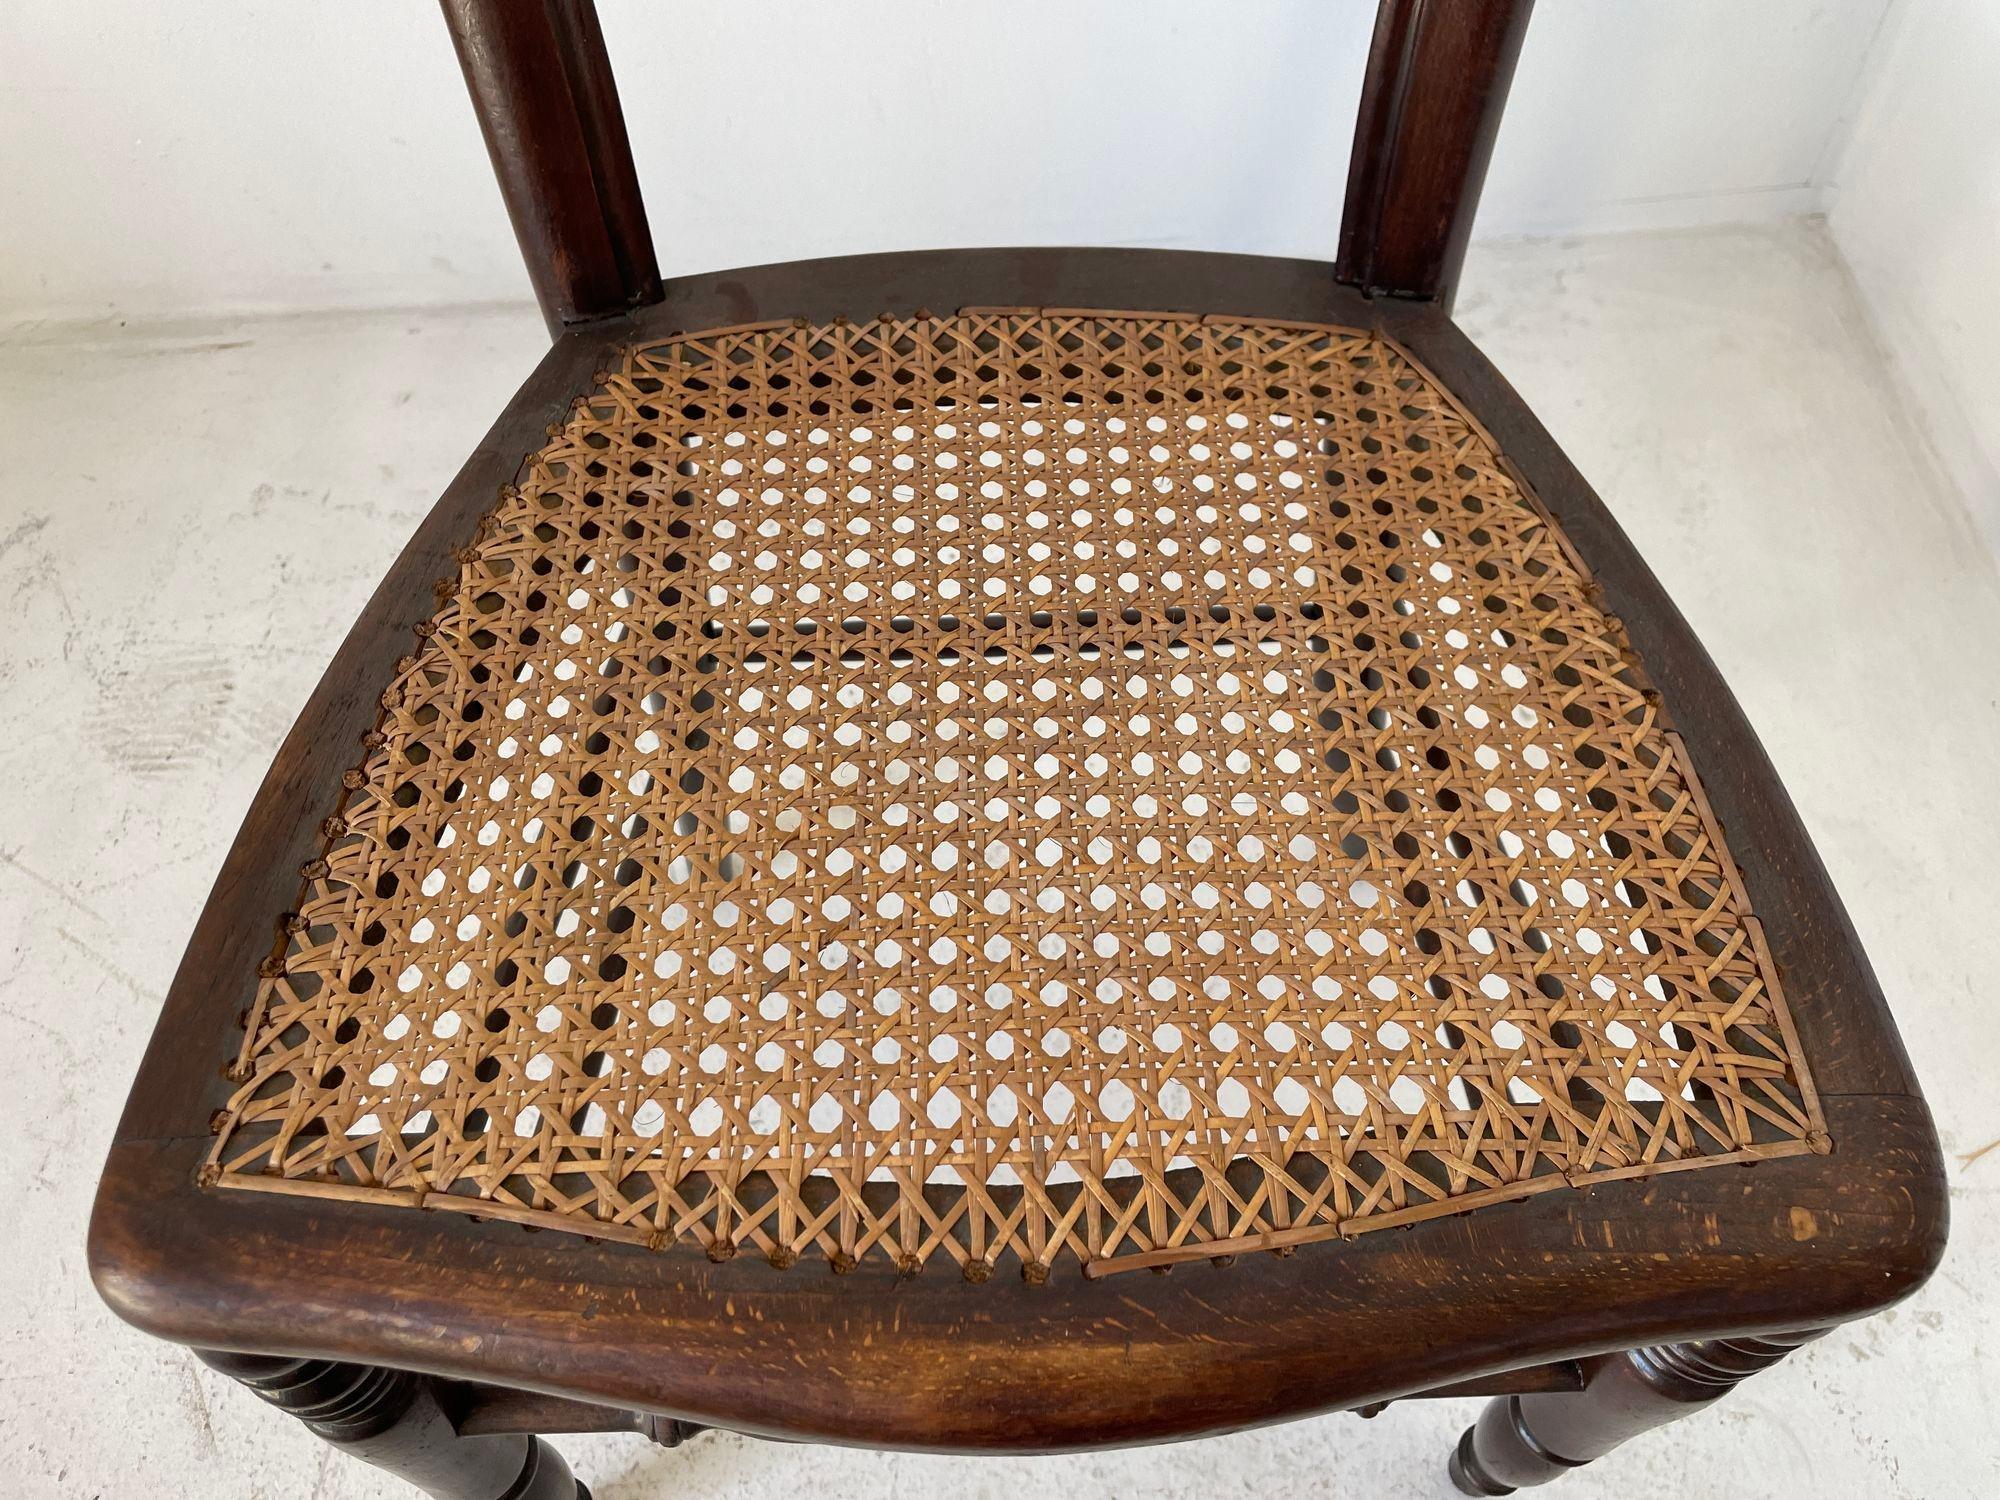 Antique 19th century French Provincial walnut side chair.
Antique French Country caned seat walnut chair.
Chair has a waisted balloon back with cabriole legs ending in scrolled French toes on pegs.
Wonderful side chair, great to use in a small